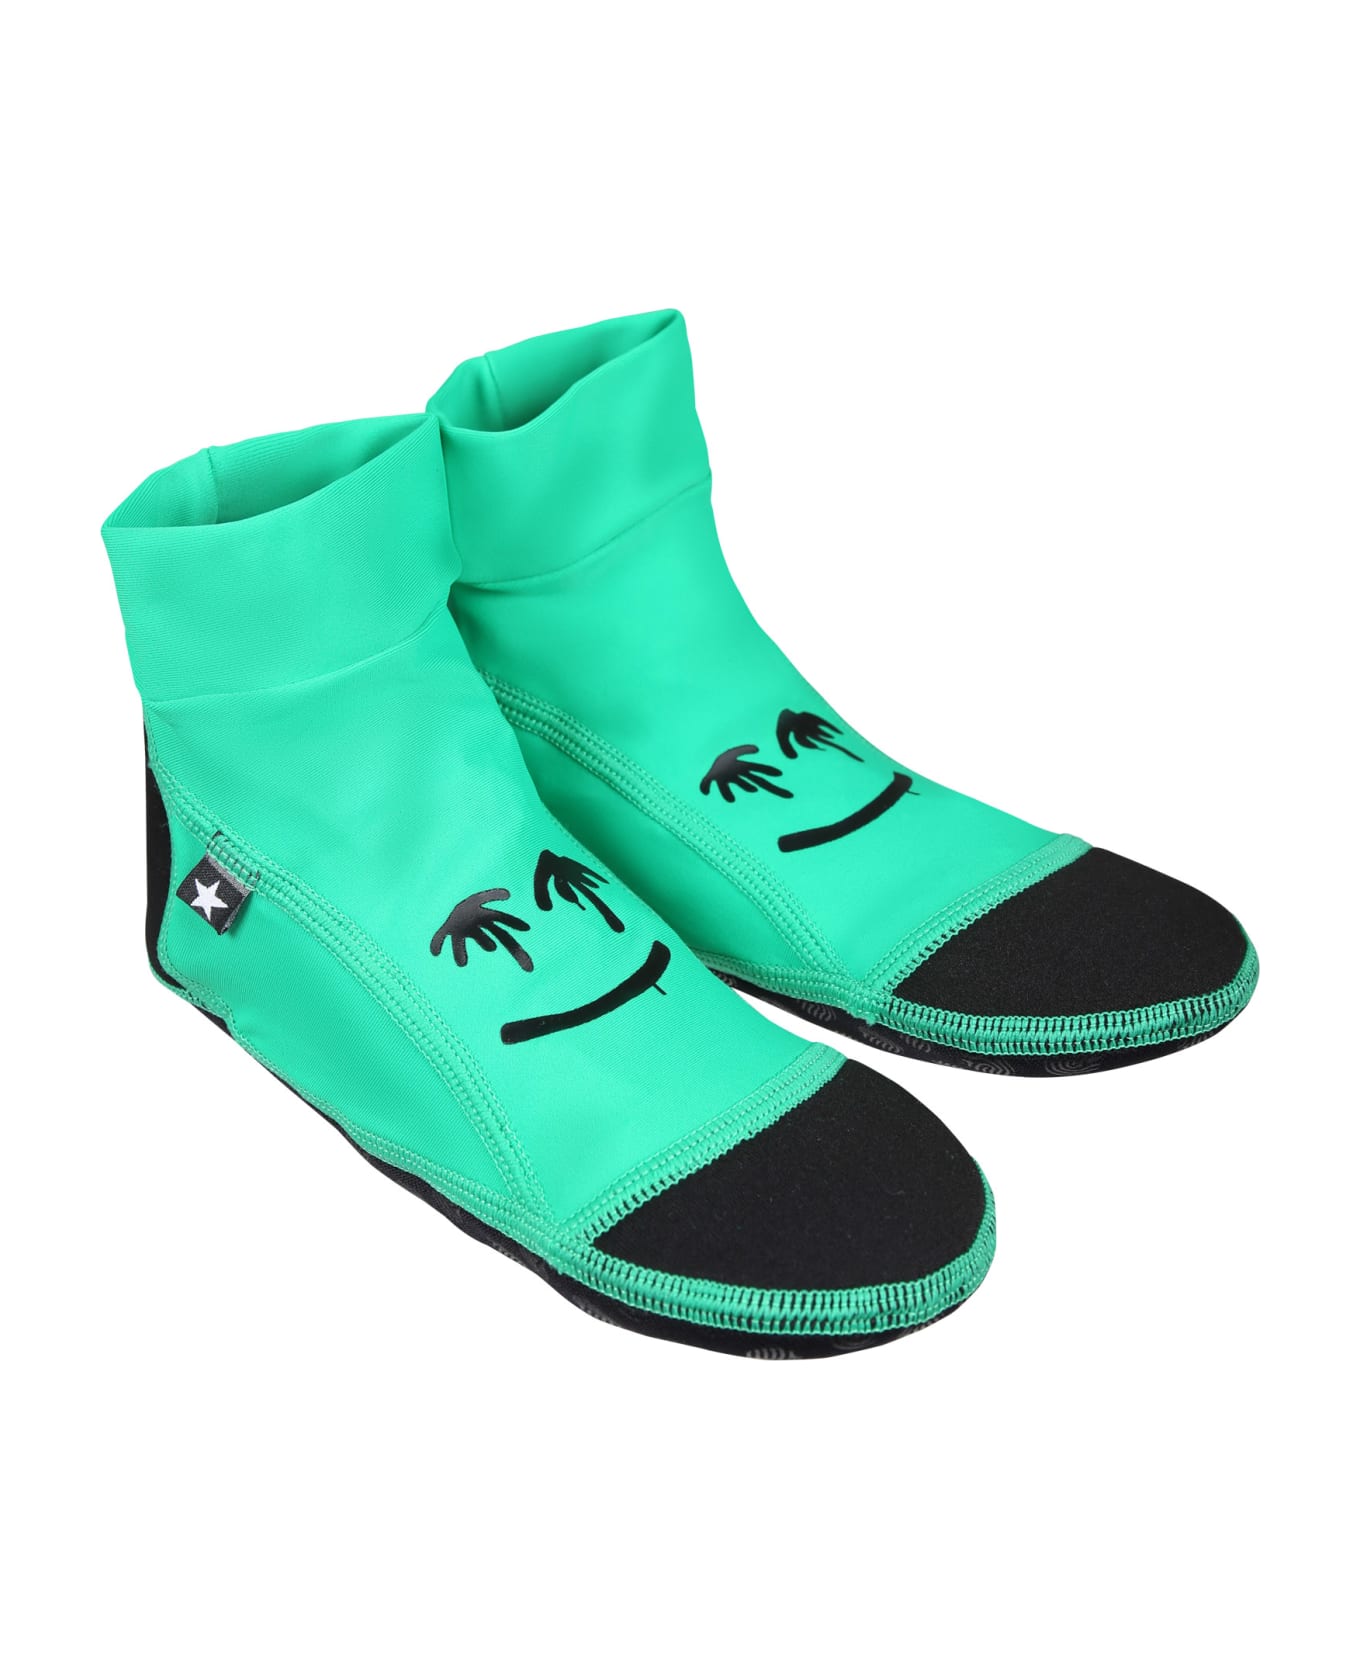 Molo Green Socks For Kids With Smiley - Green